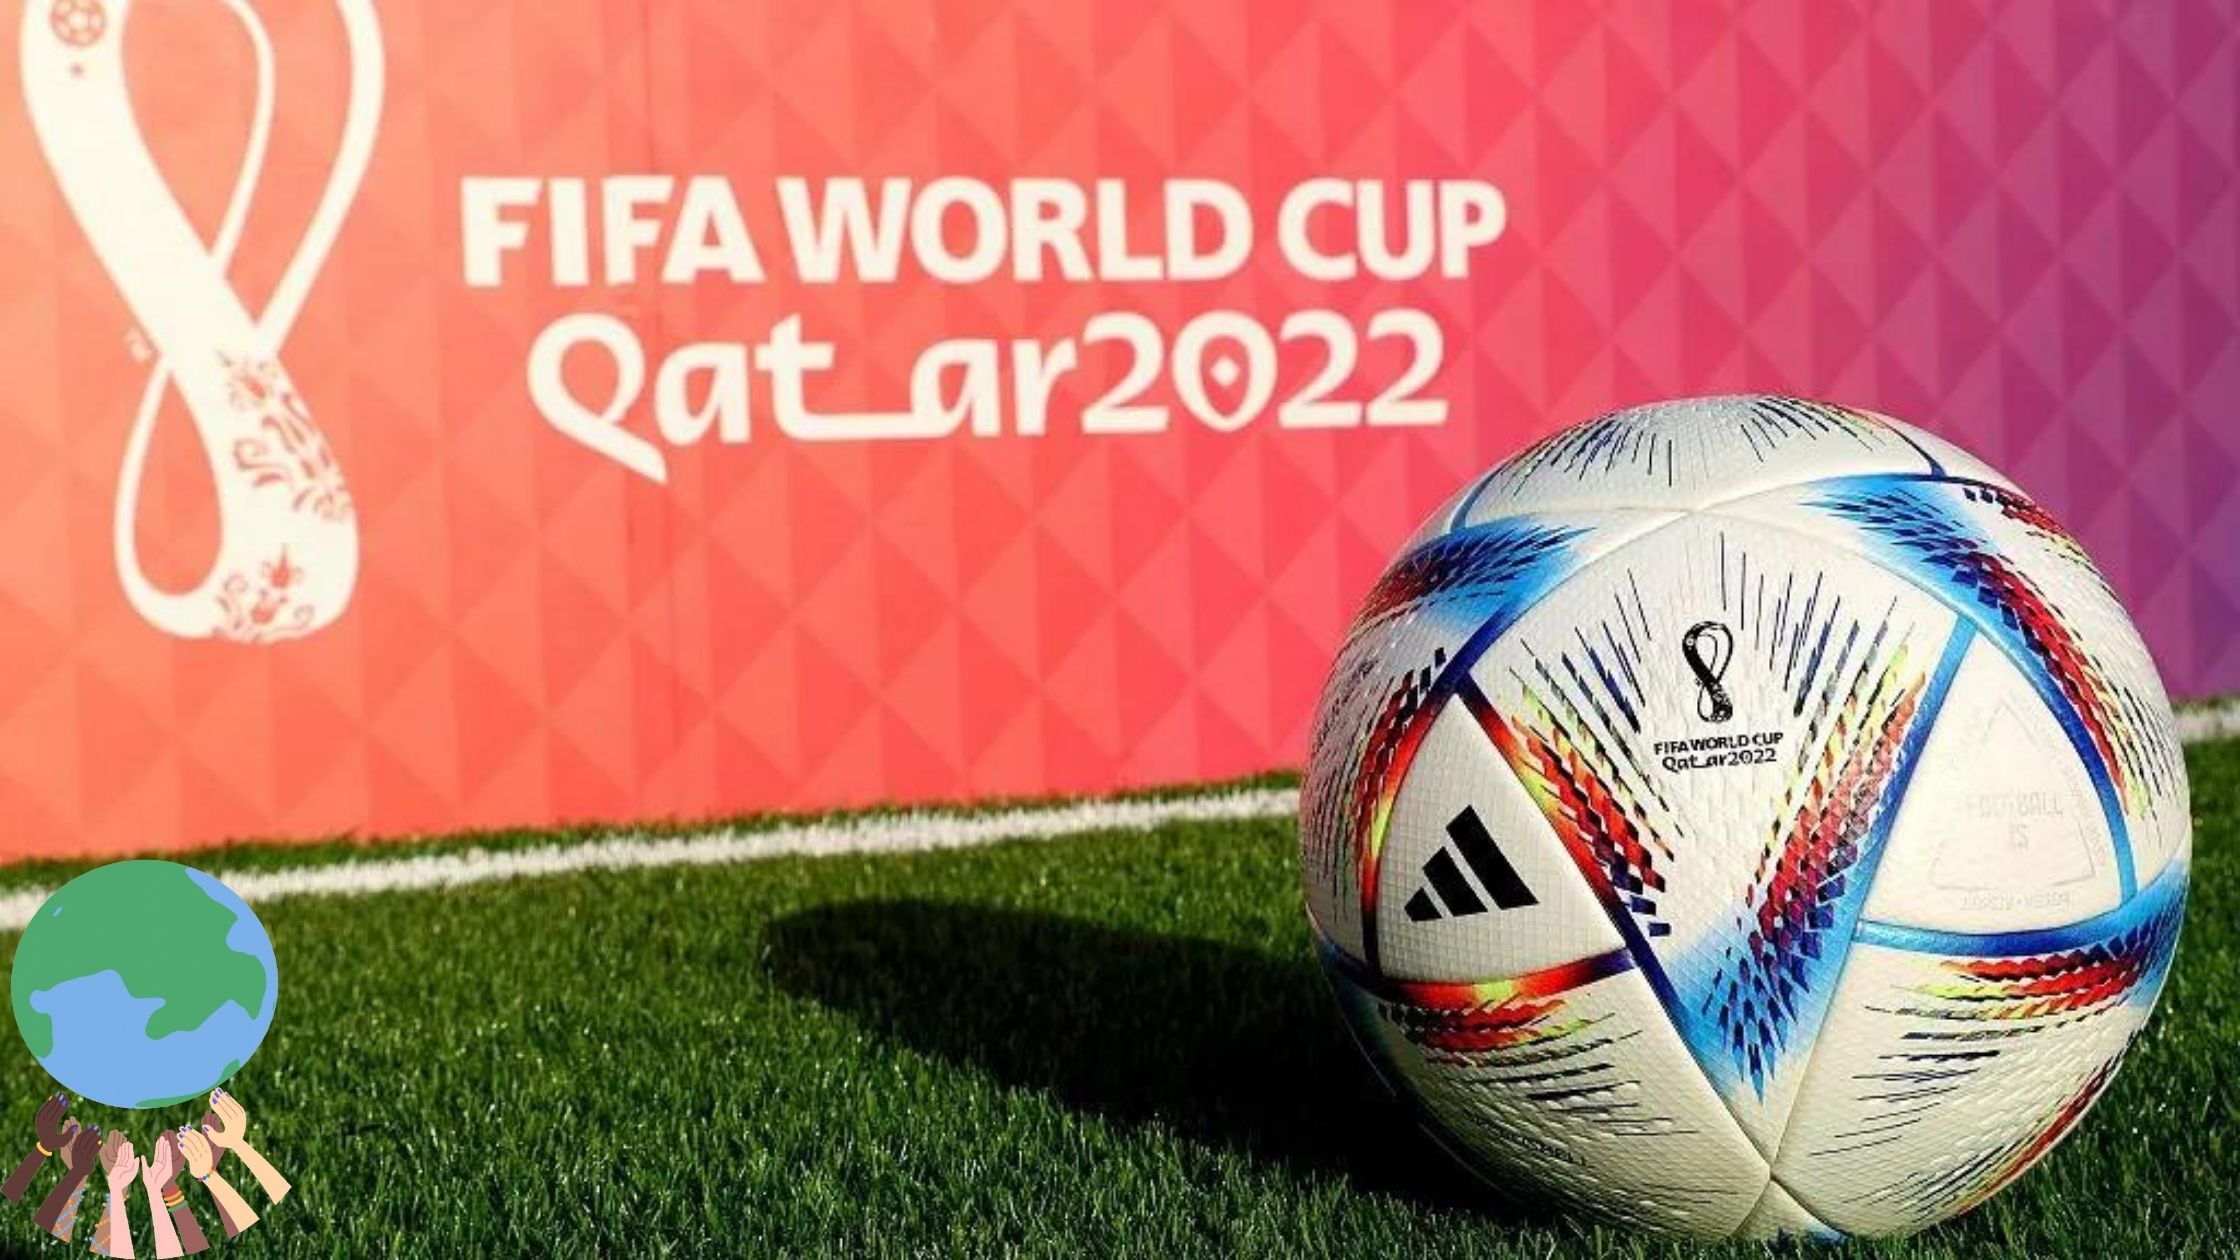 Top 10 Things To Know Before FIFA 2022 World Cup in Qatar